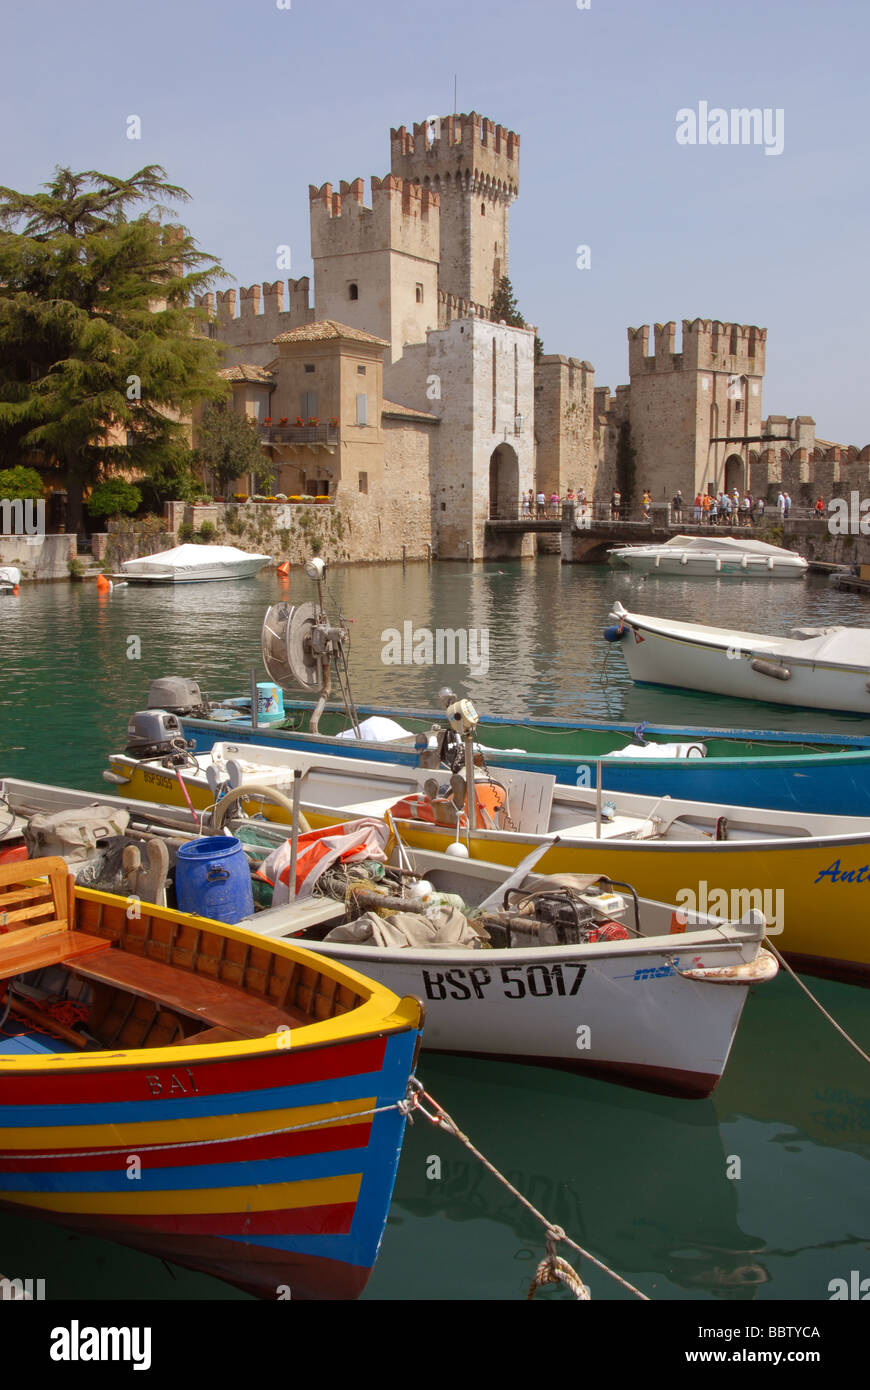 Castle and boats at Sirmione Lake Garda Italy Stock Photo